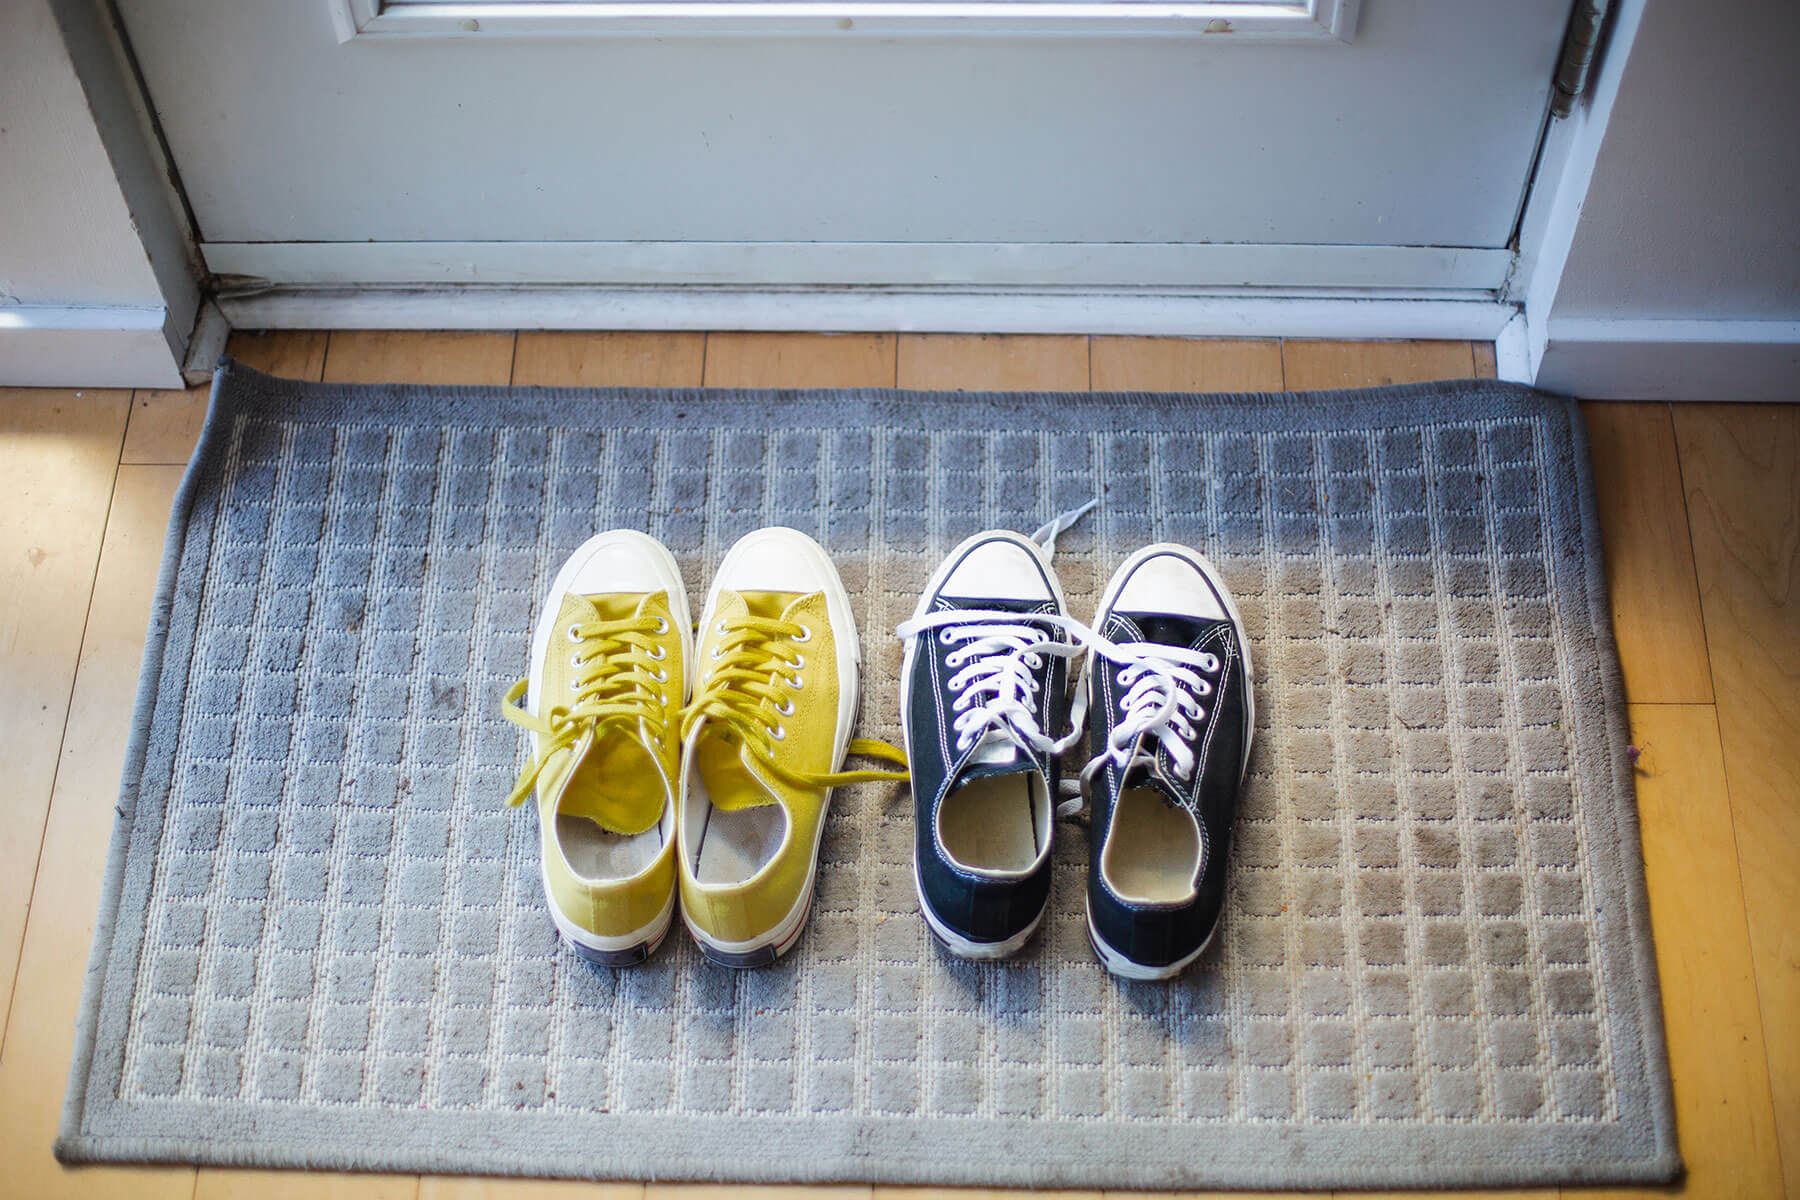 Two pairs of shoes on doormat